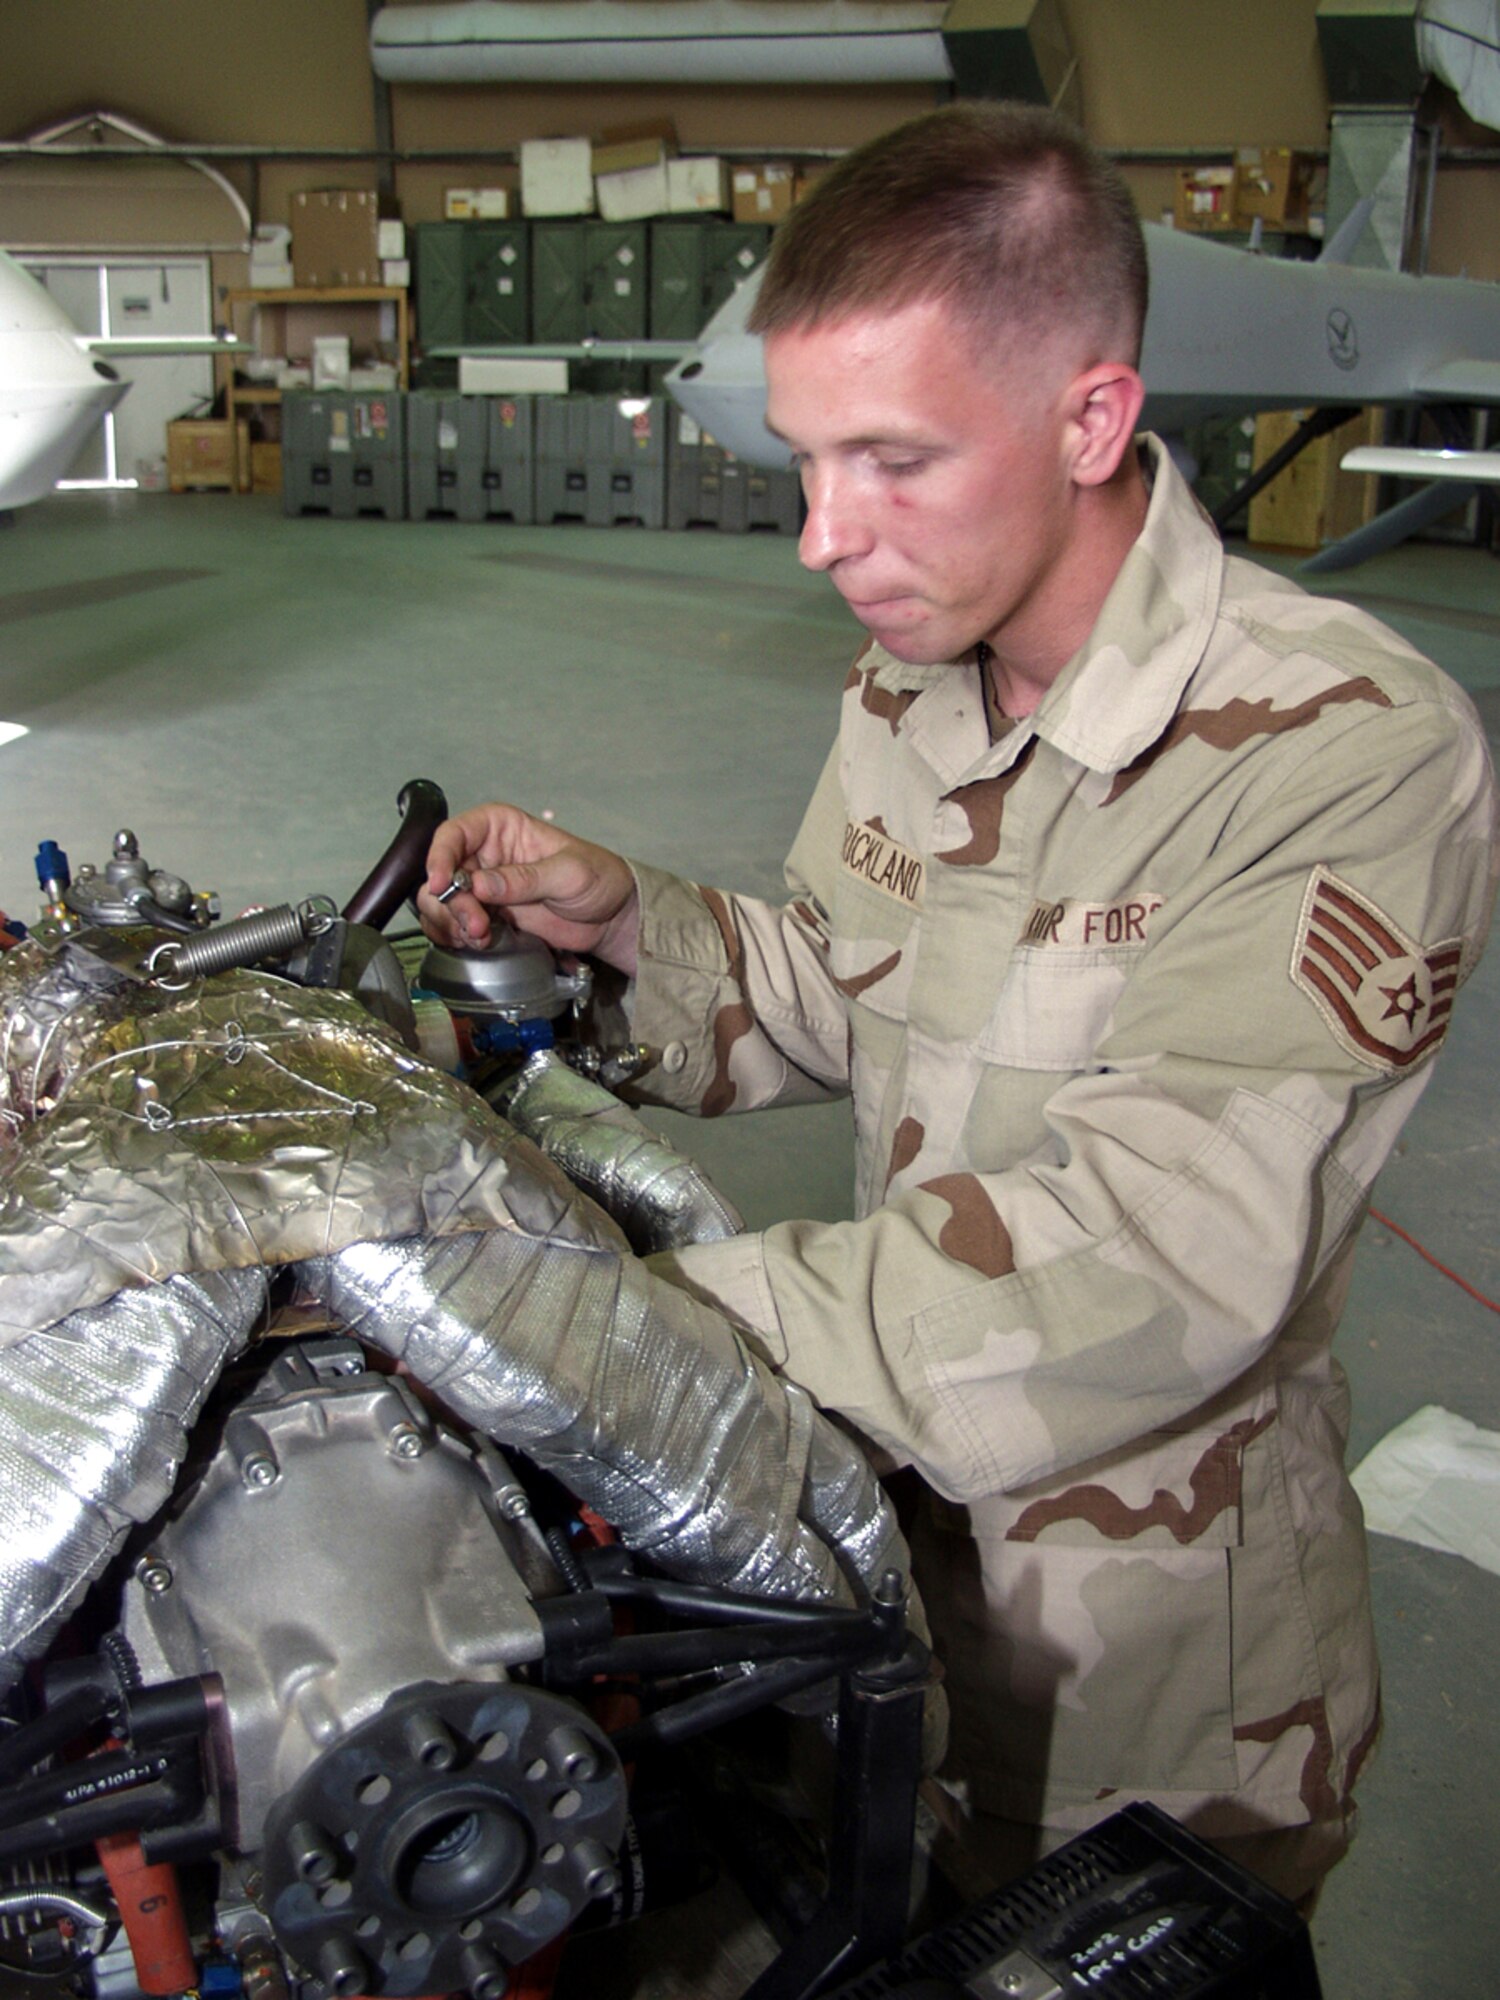 OPERATION IRAQI FREEDOM -- Staff Sgt. Kevin Strickland, 46th Expeditionary Reconnaissance Squadron maintenance crew chief, works on a Rotax 914 engine from an RQ-1 Predator unmanned aerial vehicle at a deployed location participating in Operation Iraqi Freedom.  His task was part of a time-phased engine overhaul procedure.  (U.S. Air Force photo by Tech. Sgt. Dan Neely)